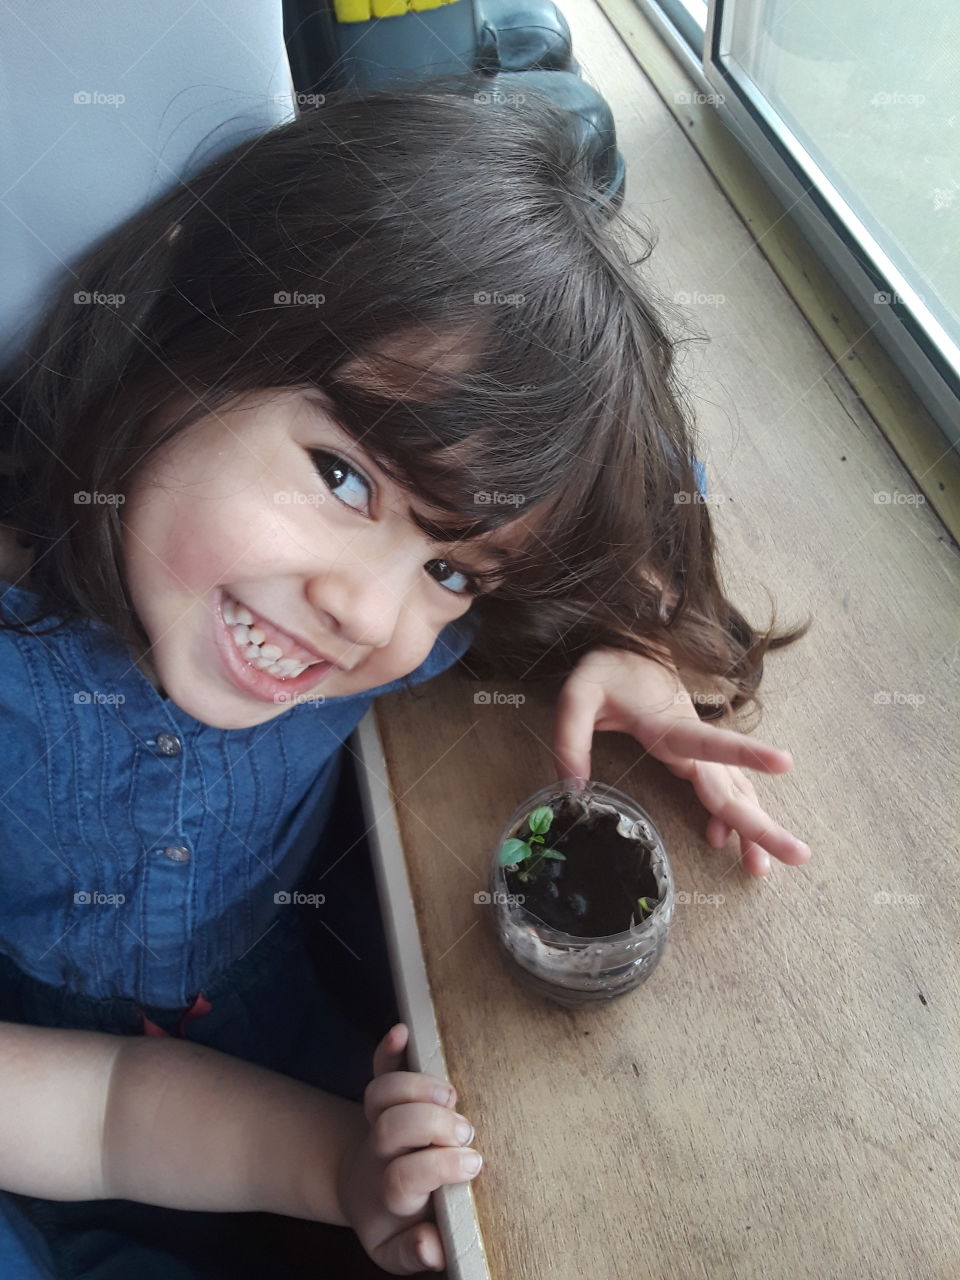 Toddler learning about plant growth.